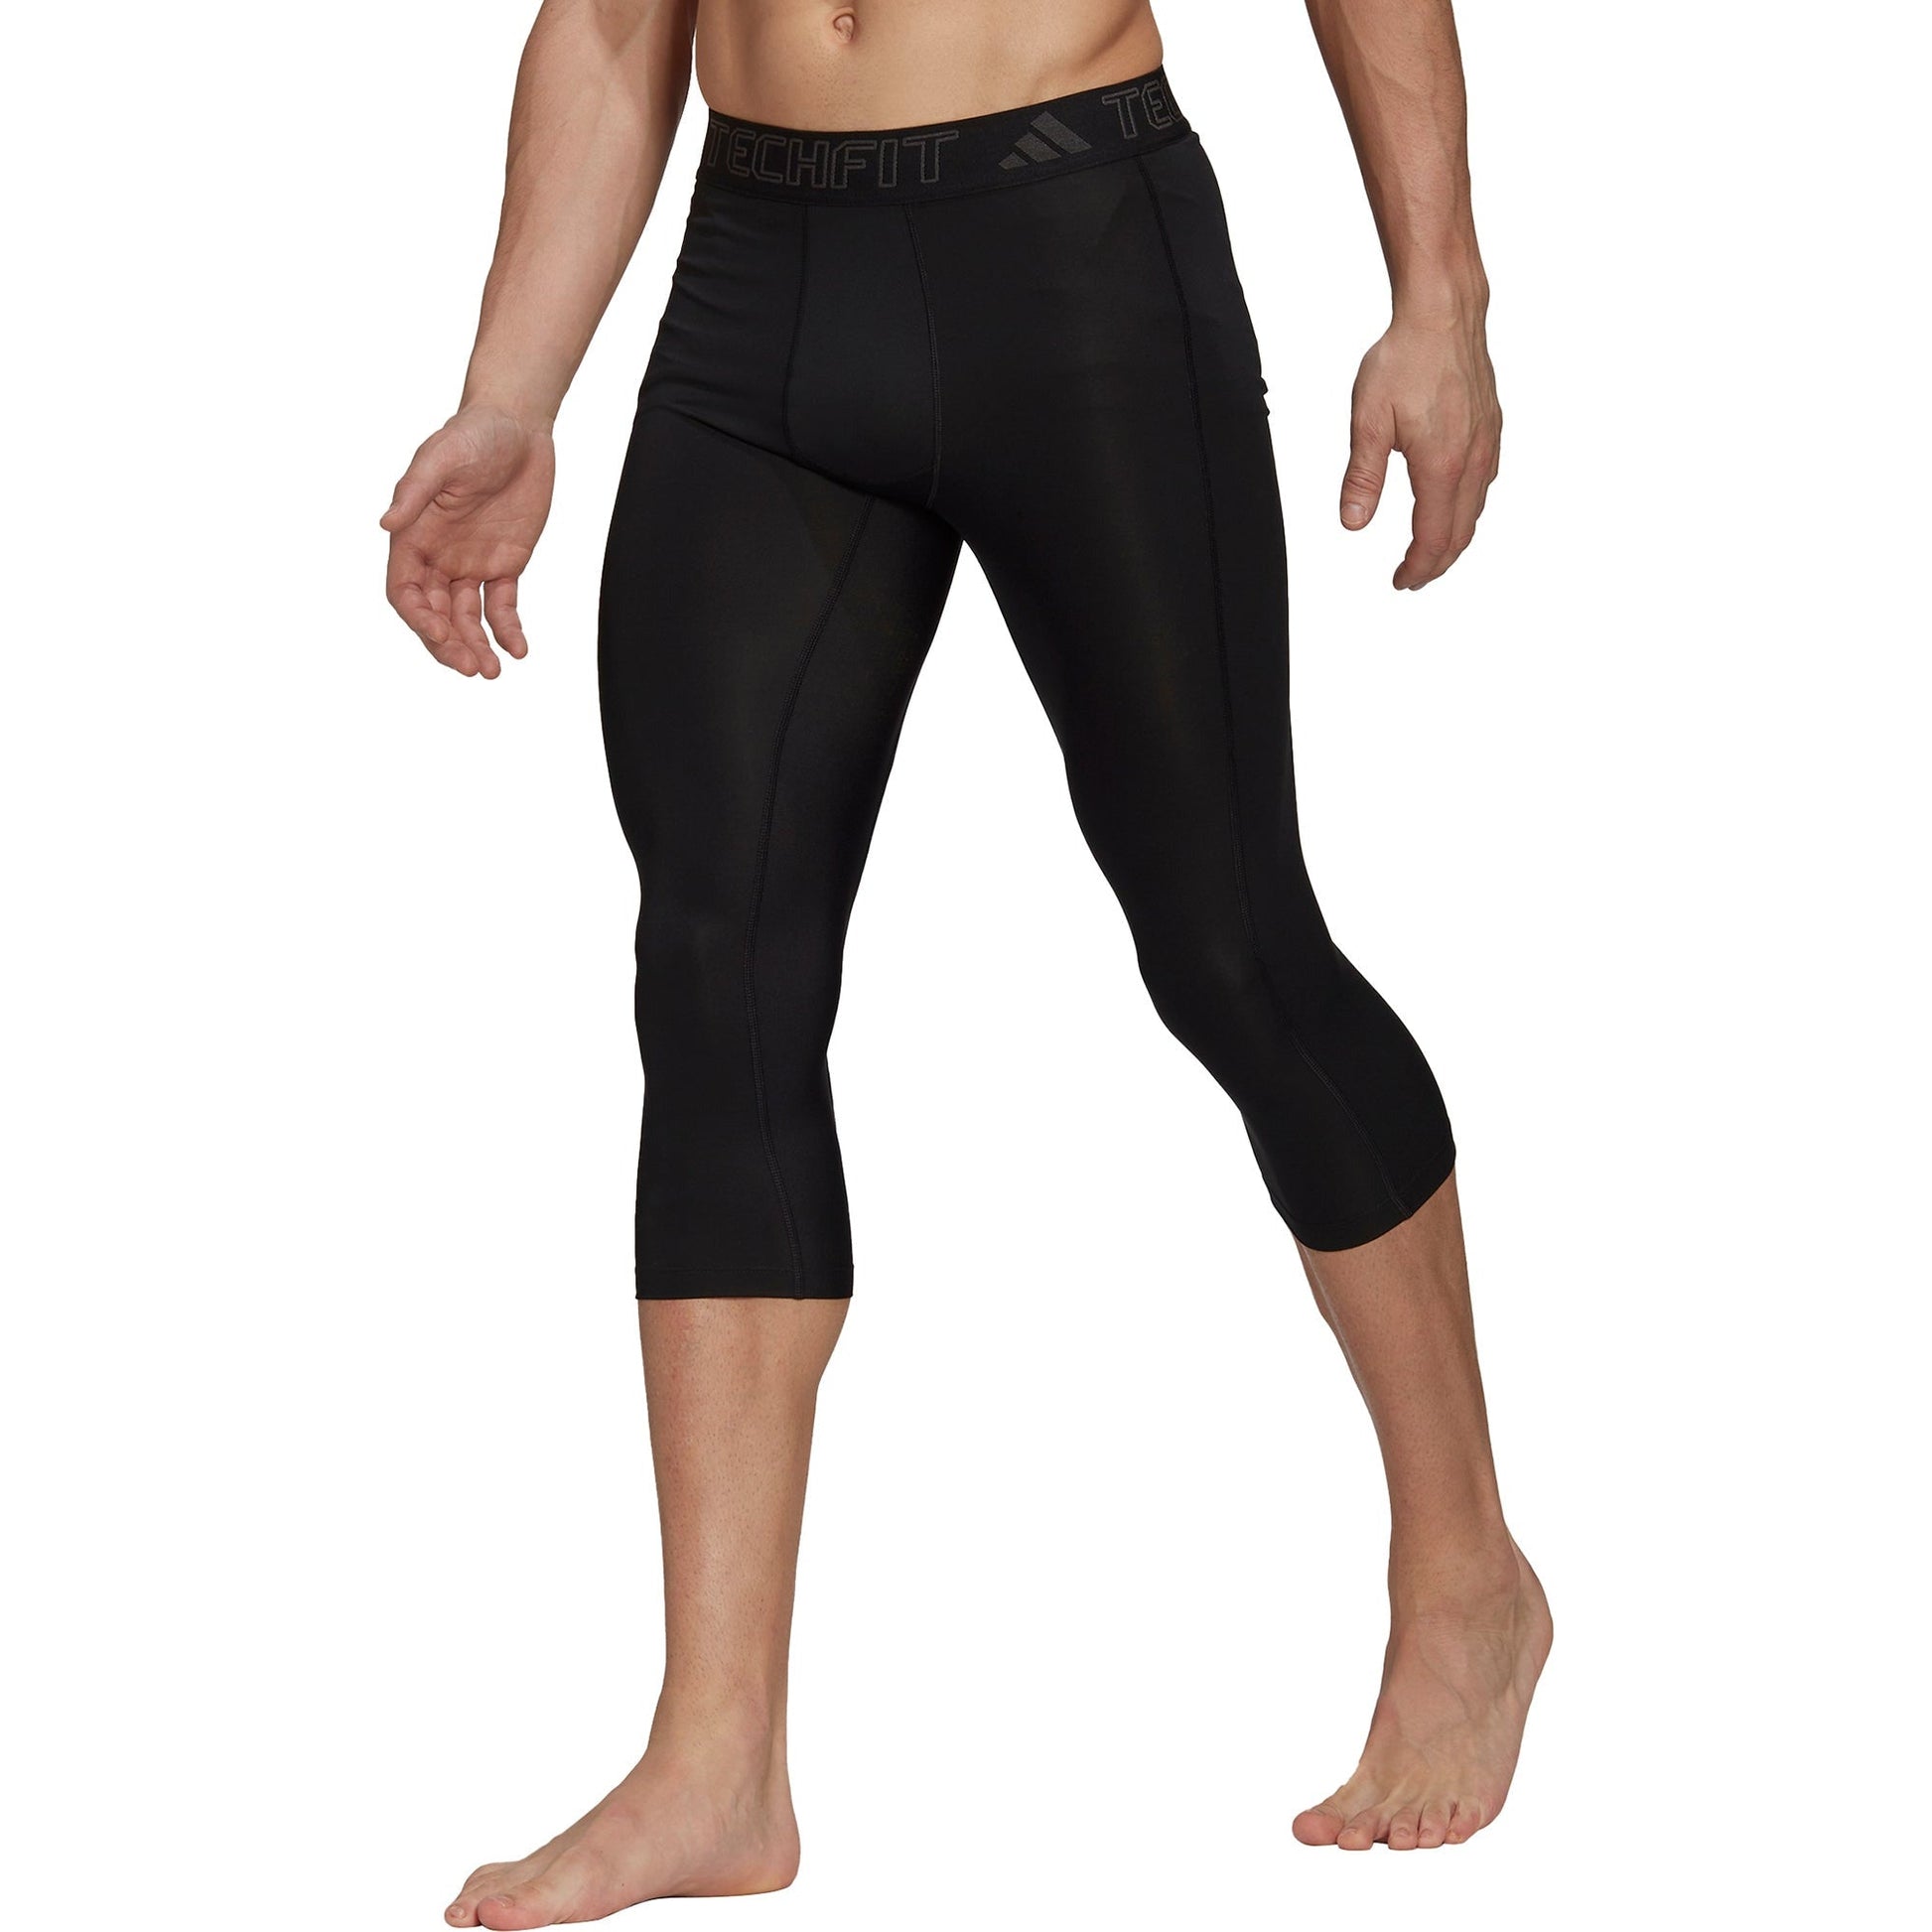  1 Pack Mens 3/4 Compression Pants, Dry Fit Men Running  Leggings 3/4 Tights Workout Gym Capri Pant Football Basketball